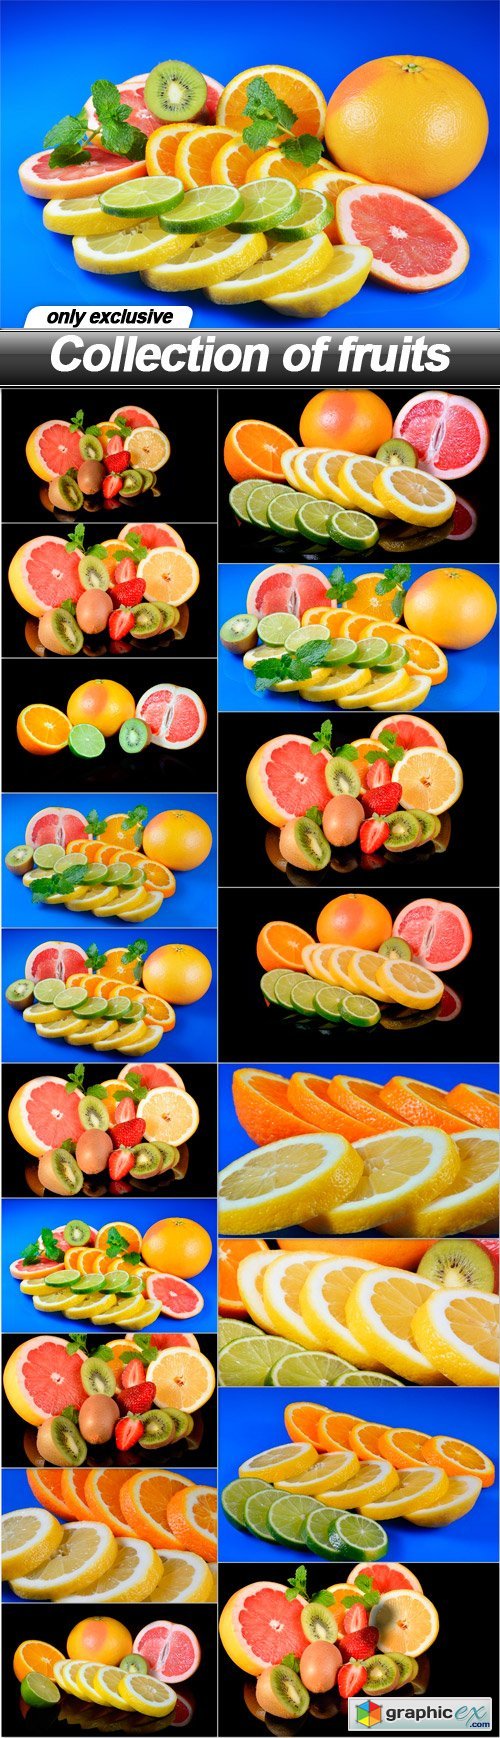 Collection of fruits - 18 UHQ JPEG